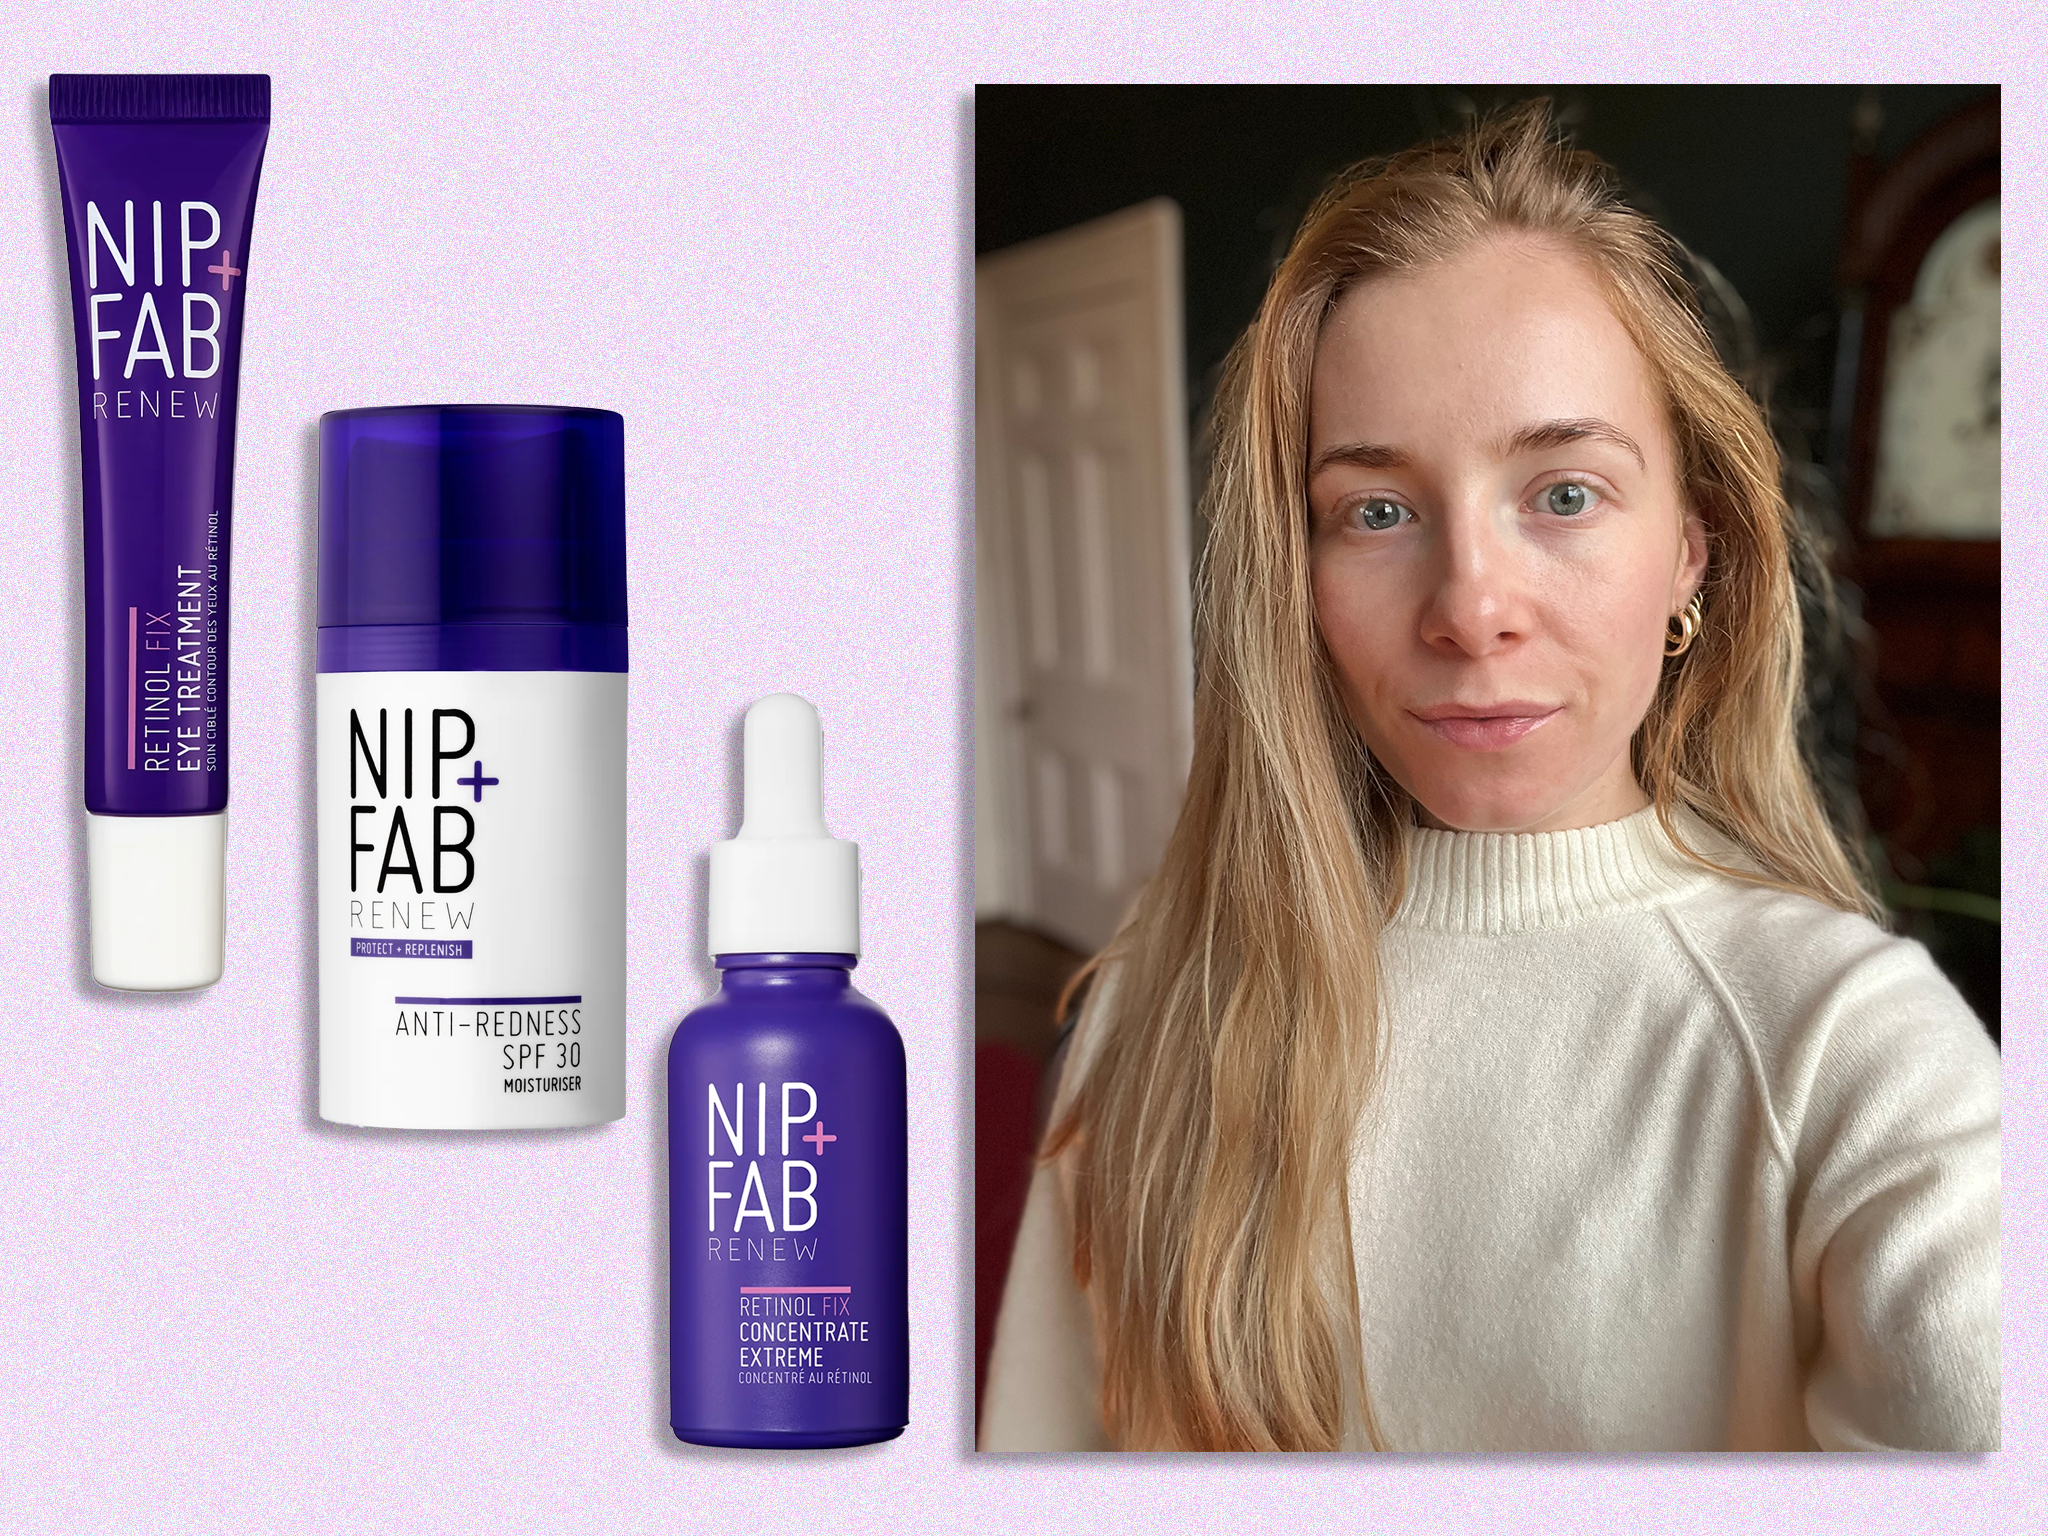 We introduced the products into our nighttime routine to see how they performed